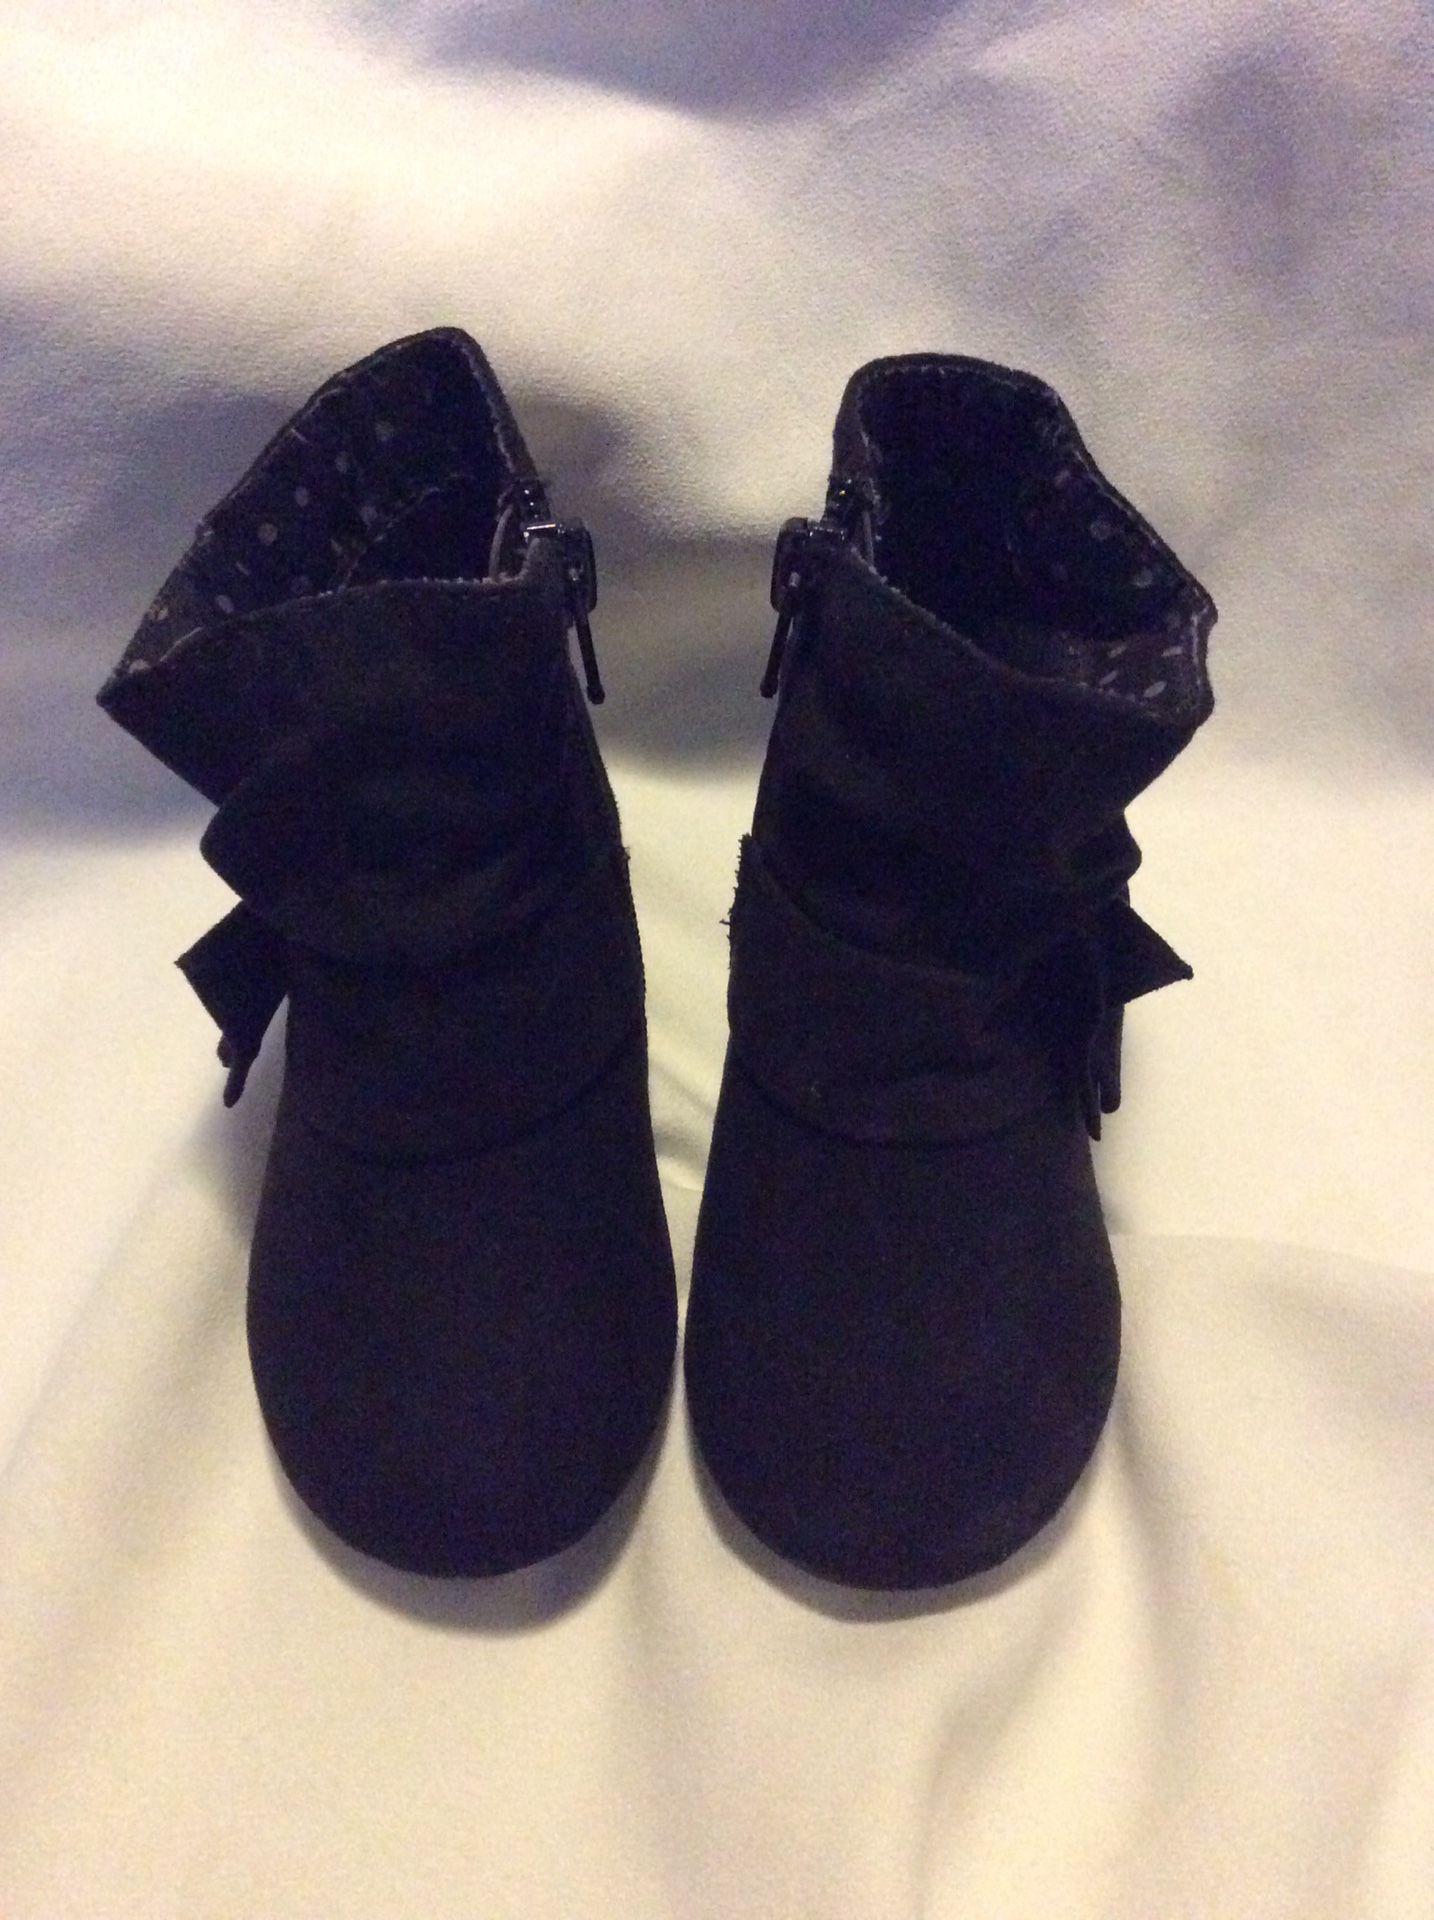 Toddler size 5 black boots